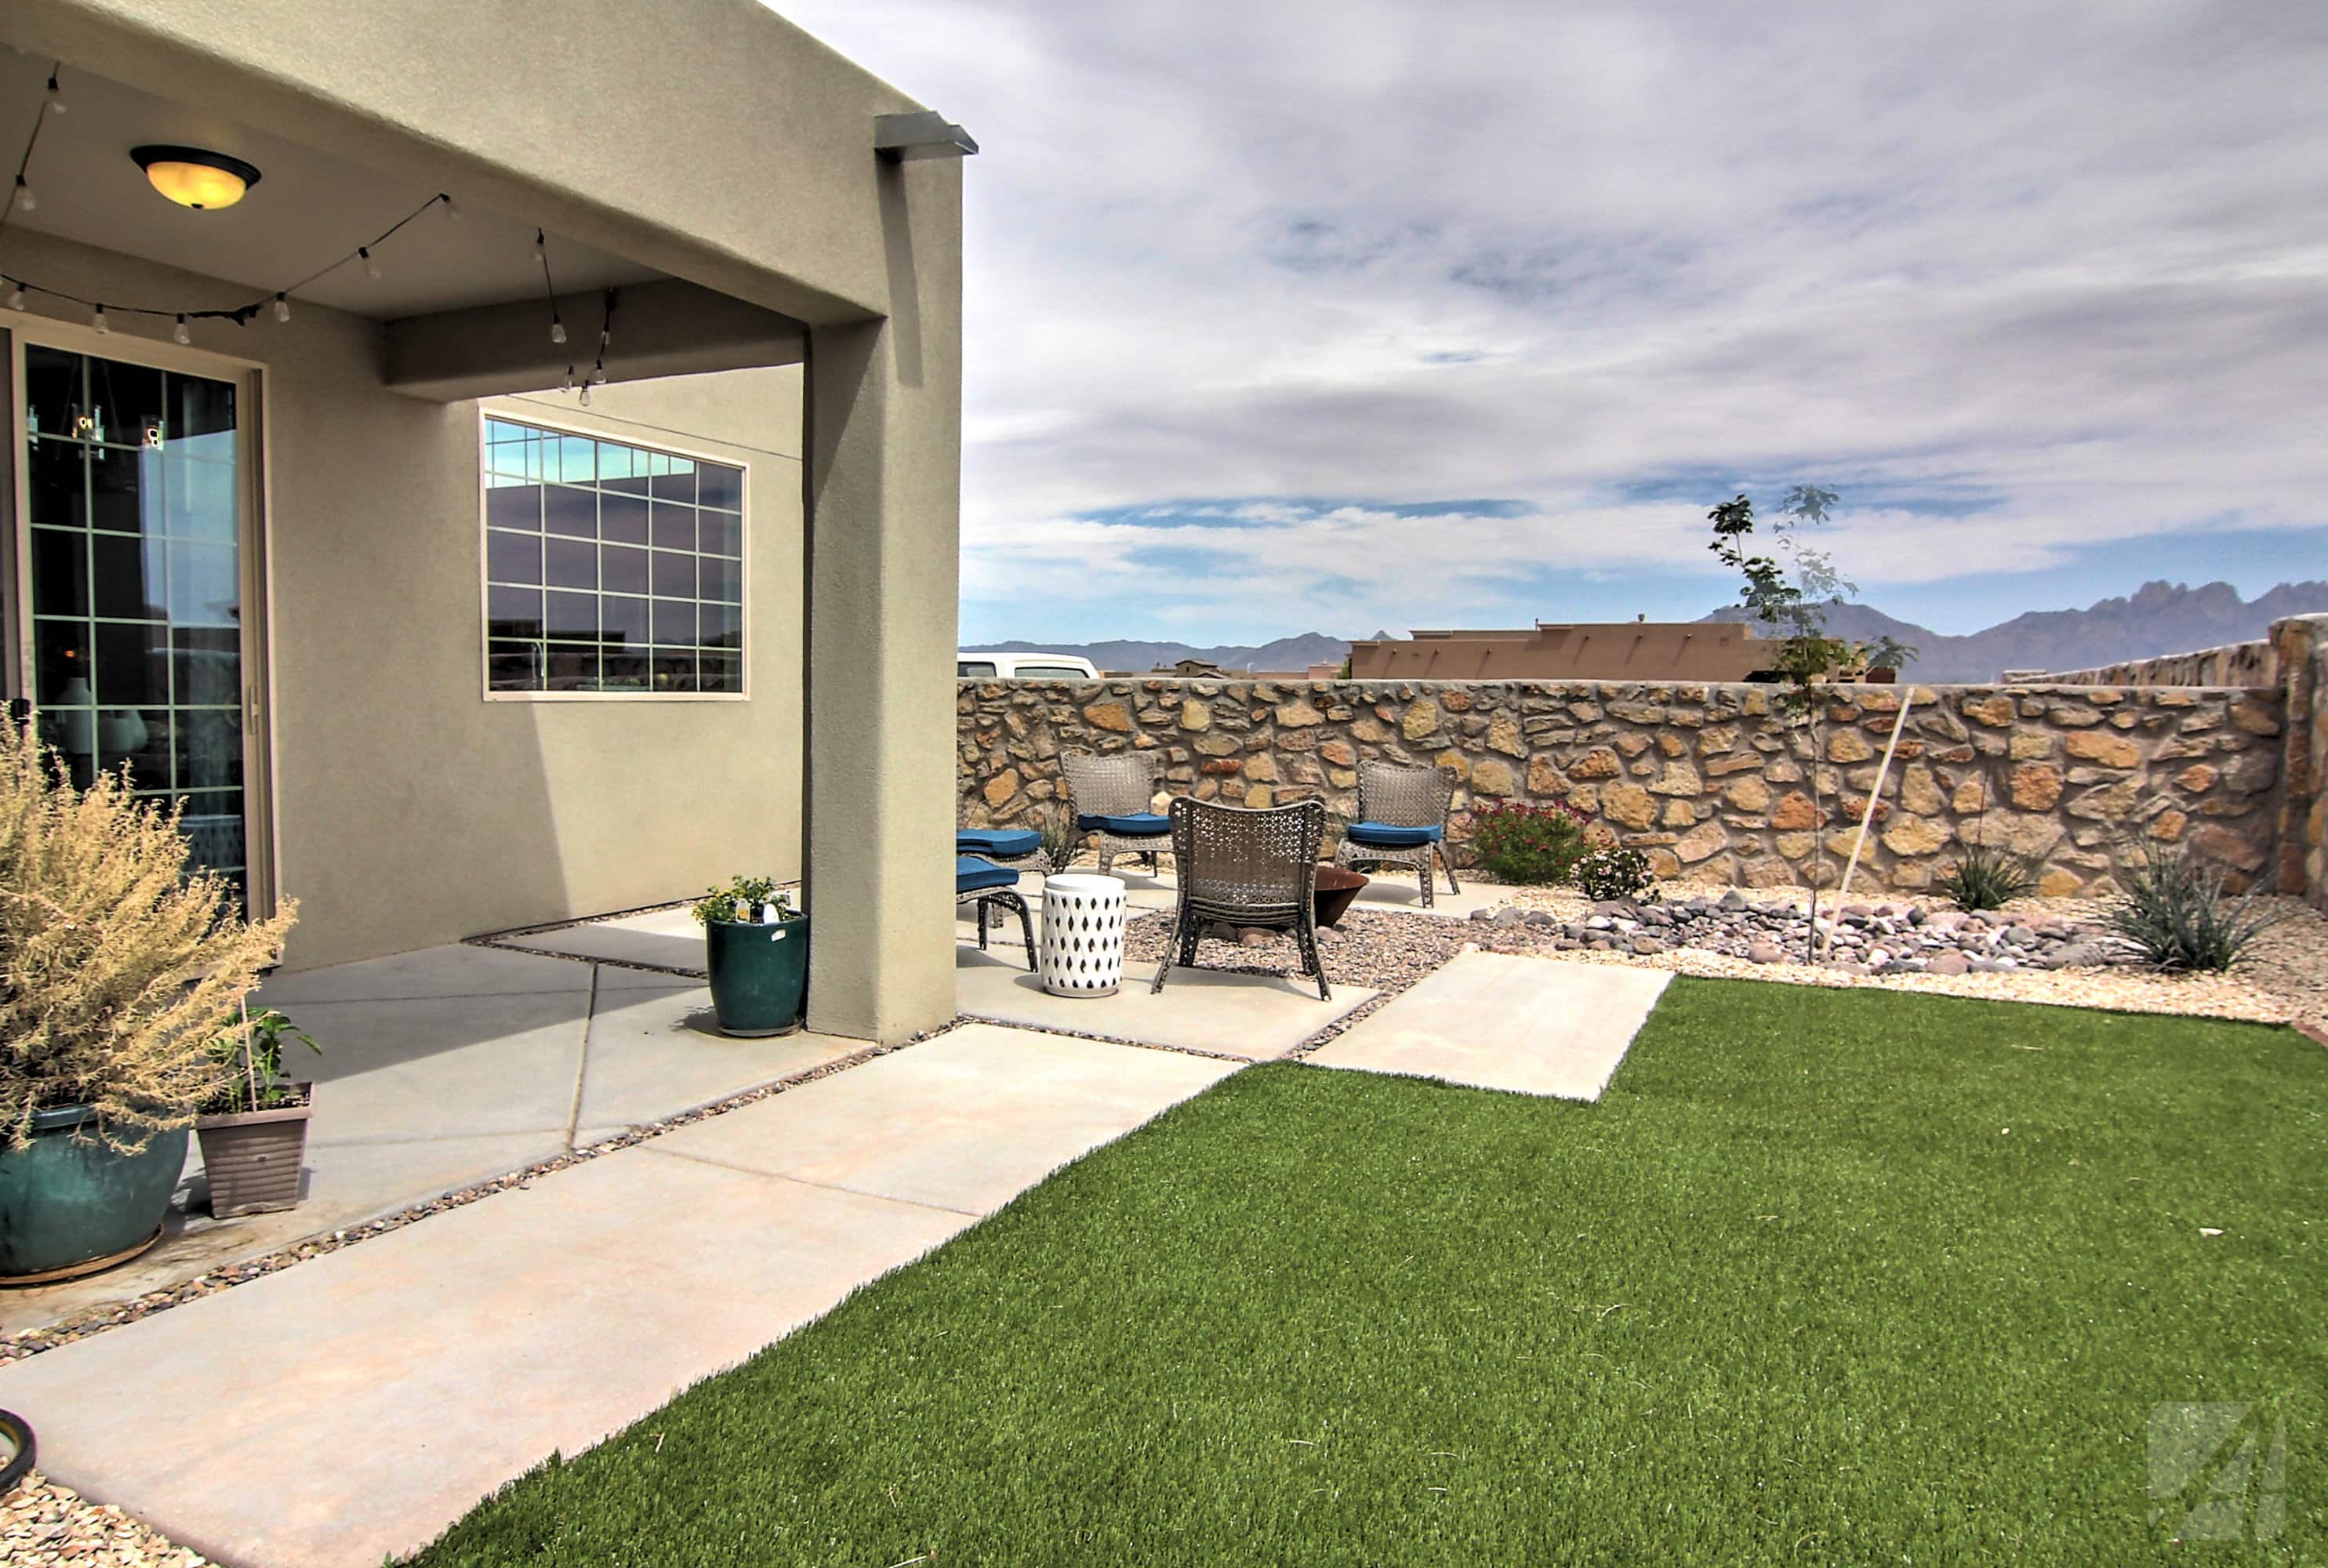 Importance of Drought Resistant Landscaping in New Mexico